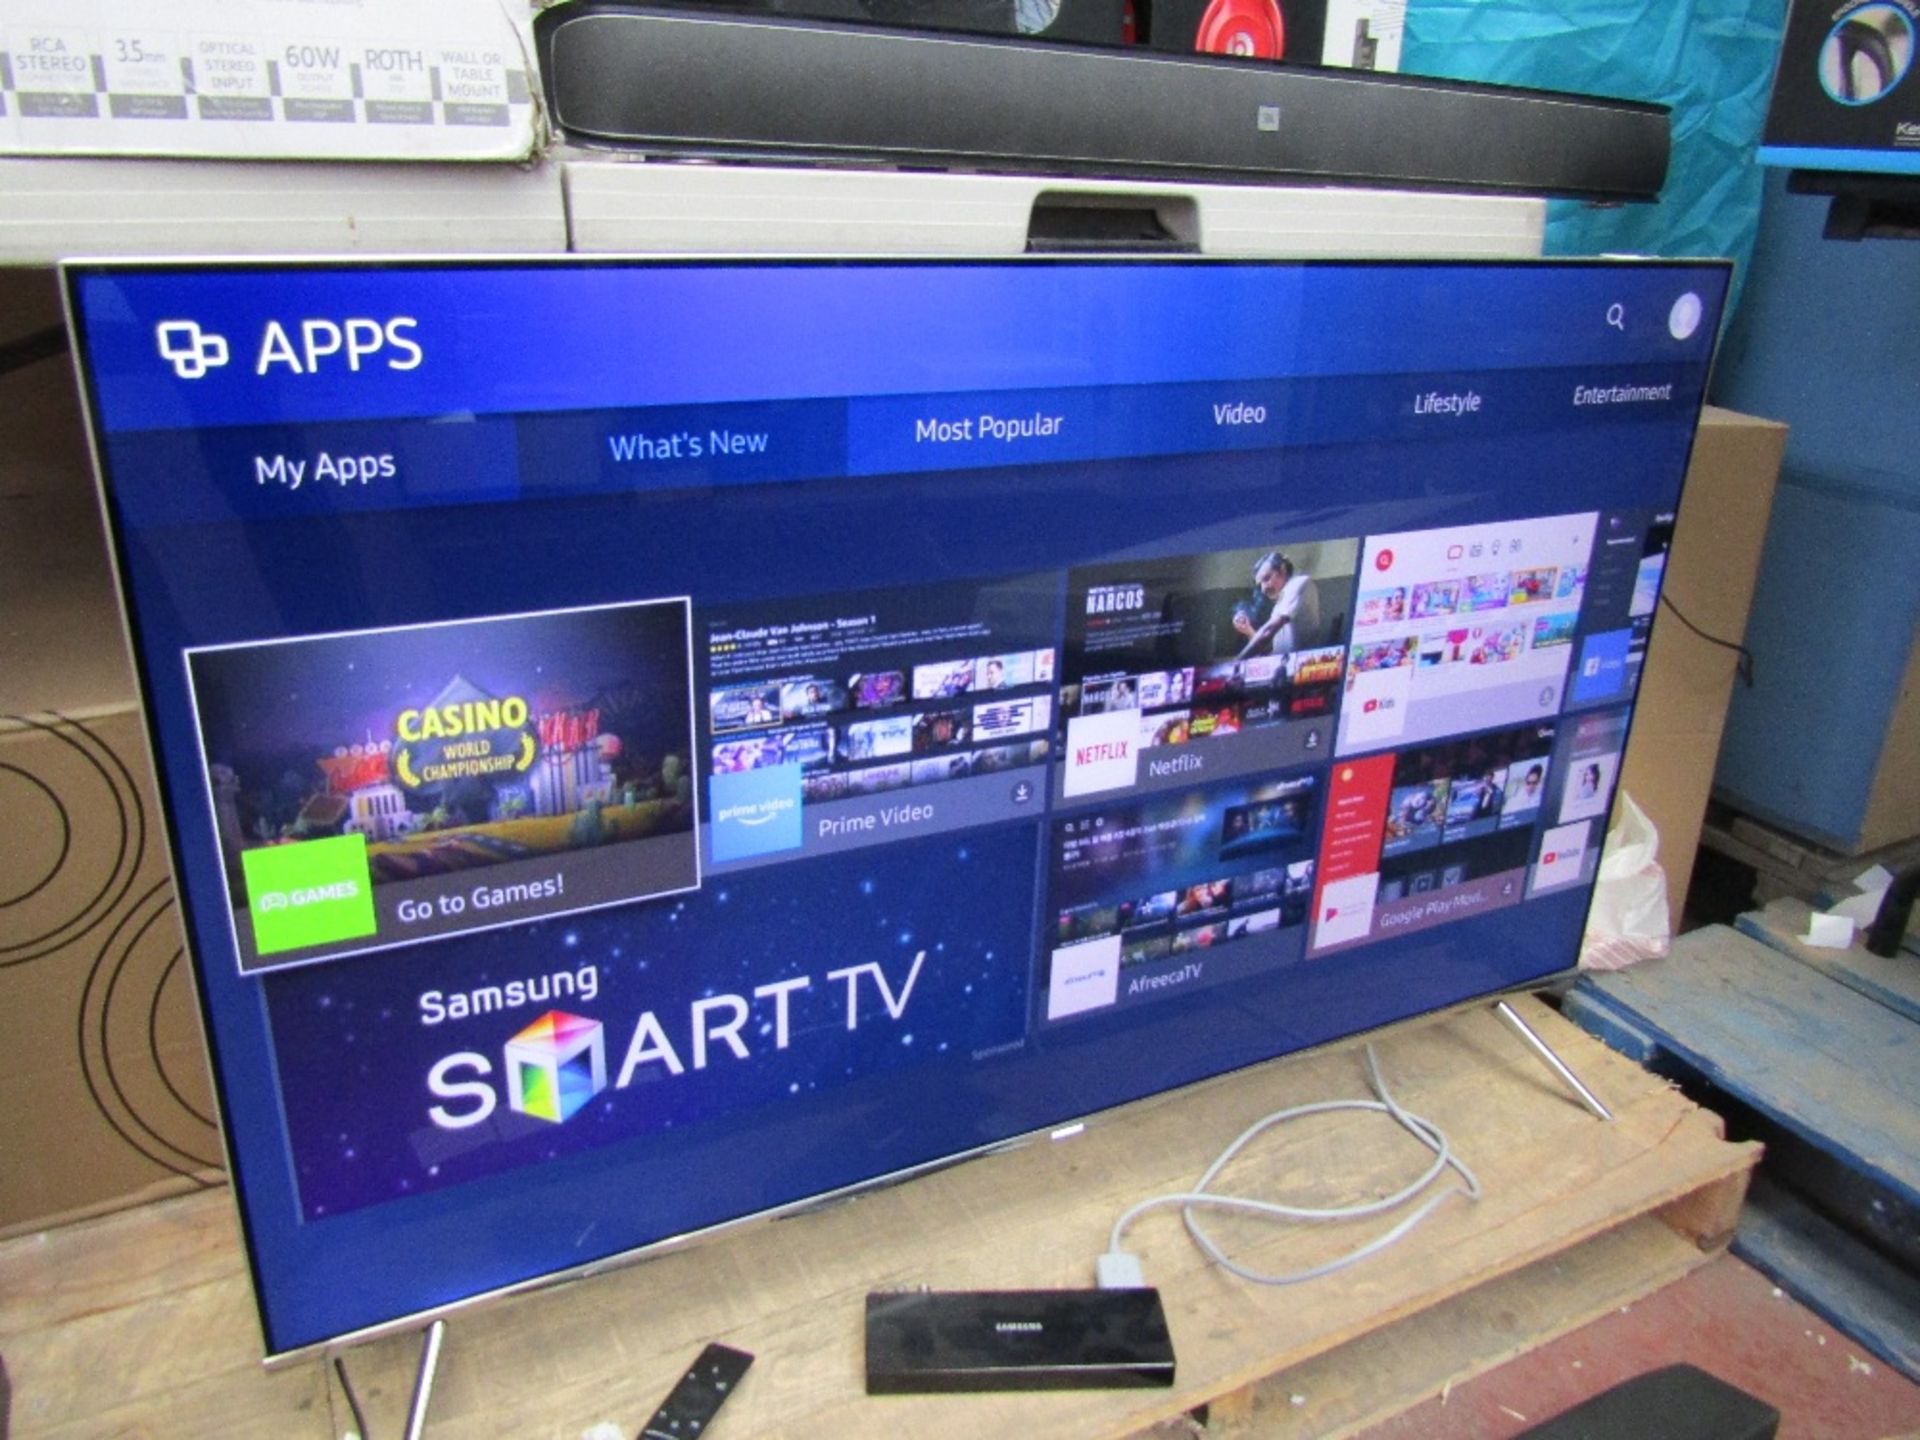 Samsung UE49KS7000 SUHD Smart TV, Tested working with remote control, with non original Box, RRP £